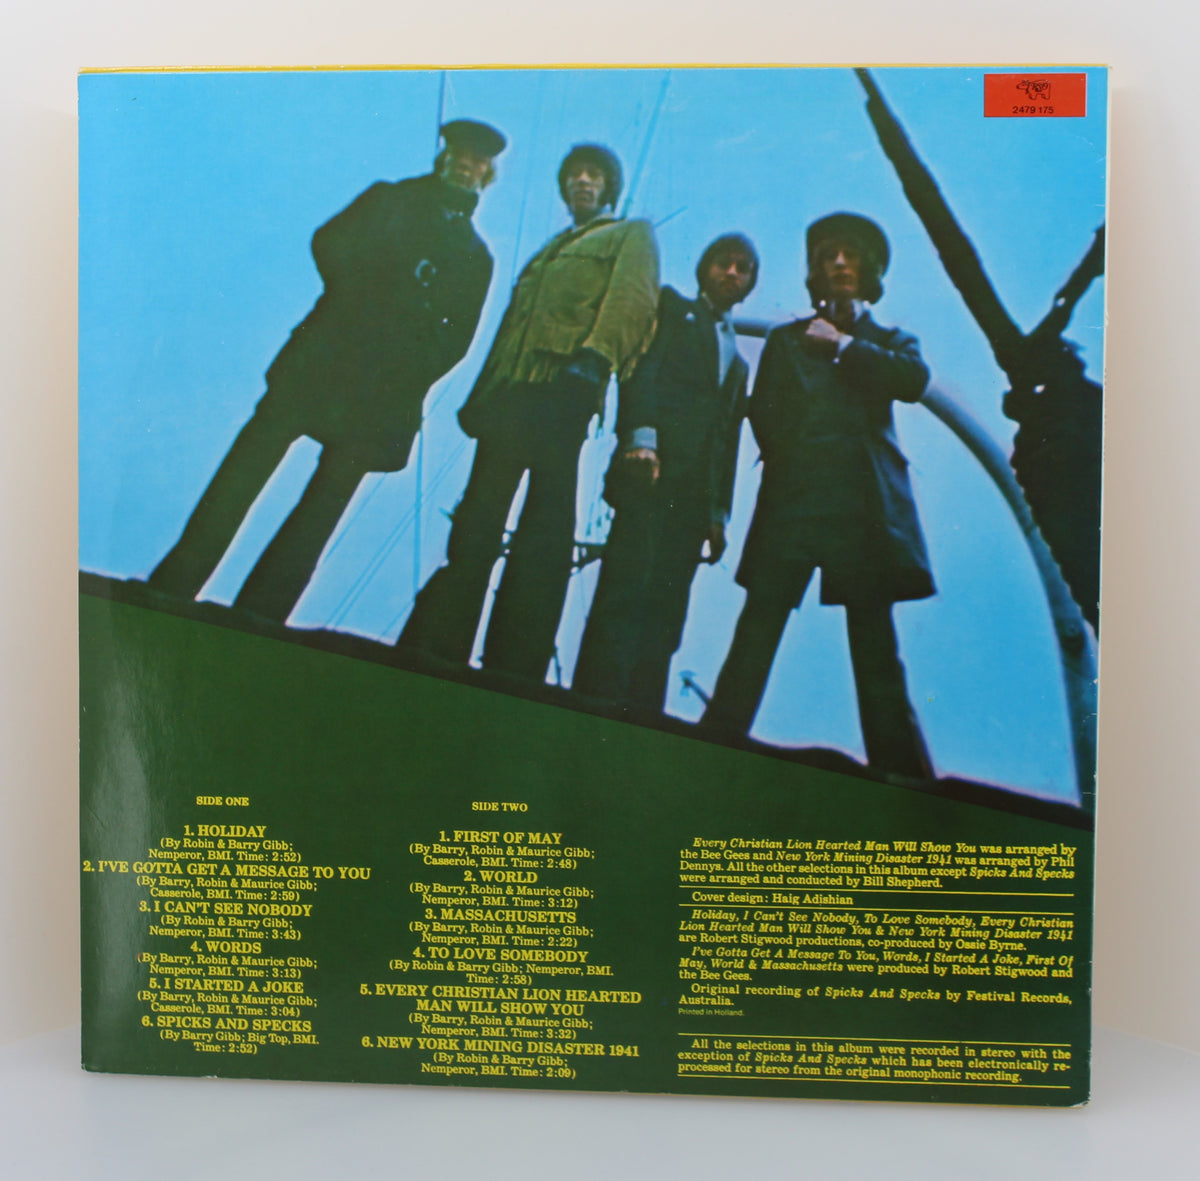 Bee Gees – Best Of Bee Gees, Vinyl, LP, Compilation, Stereo, Netherlands 1969